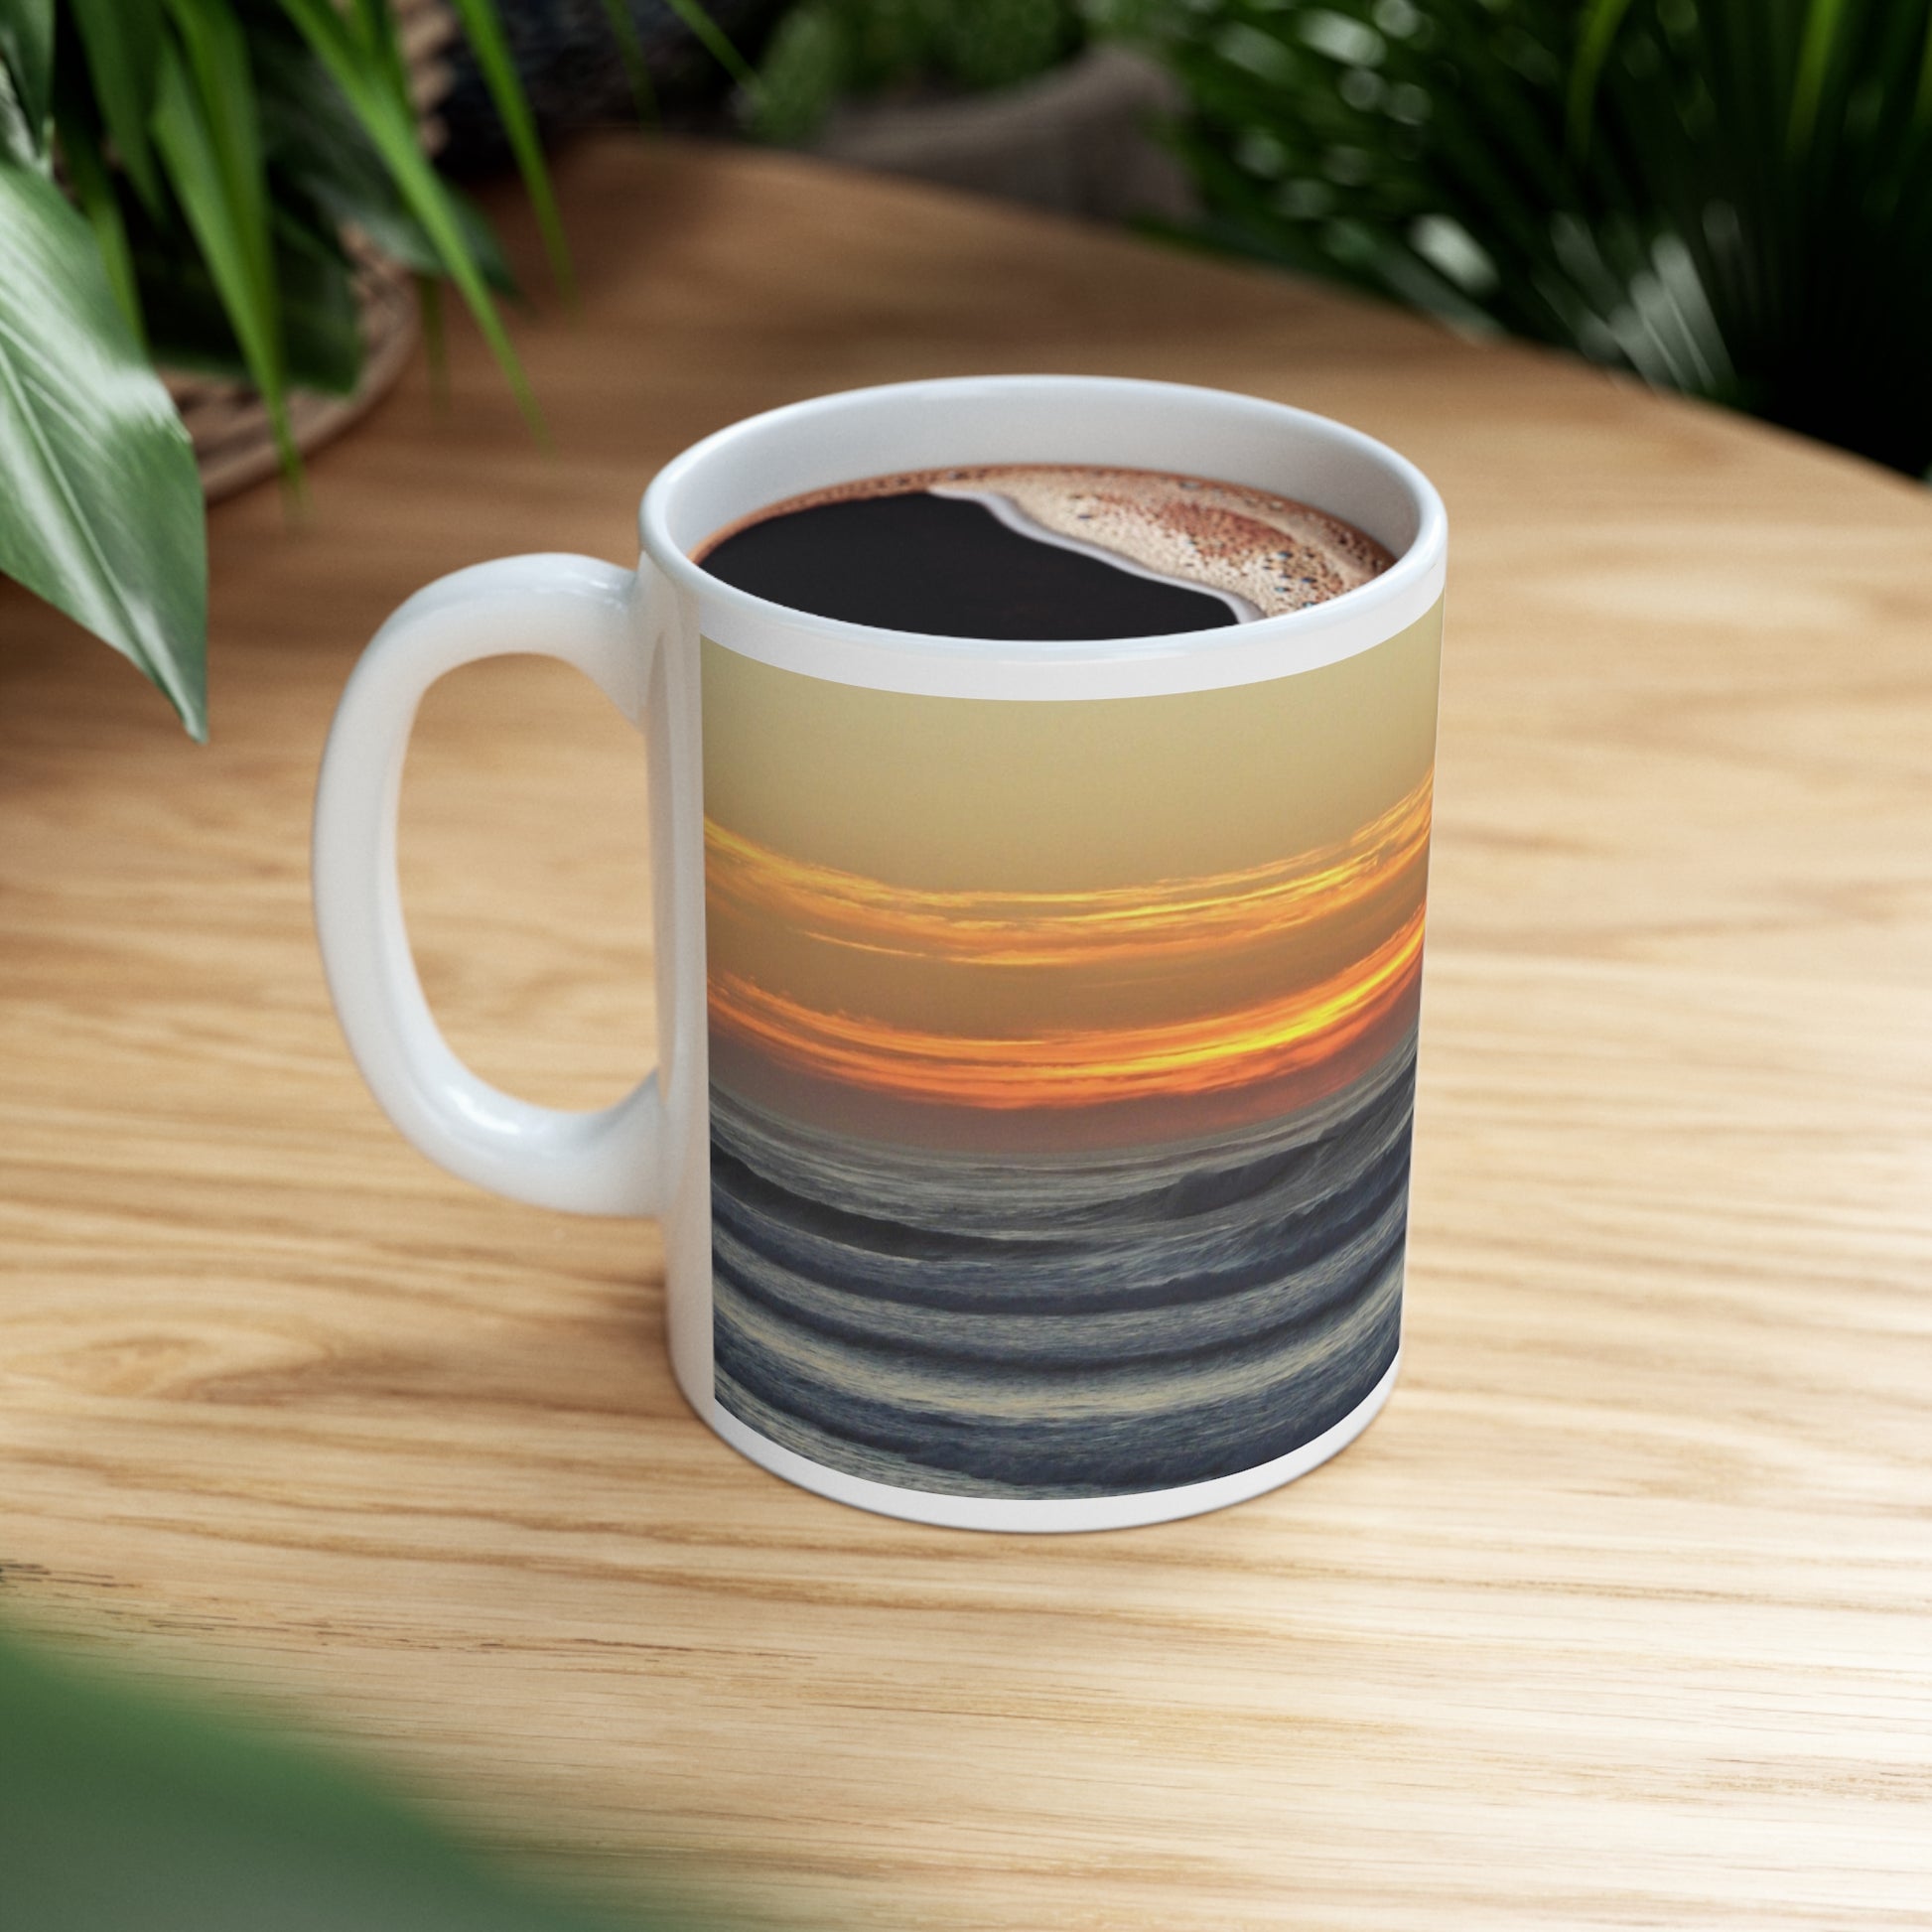 Mock up of mug filled with beverage sitting on a wooden surface